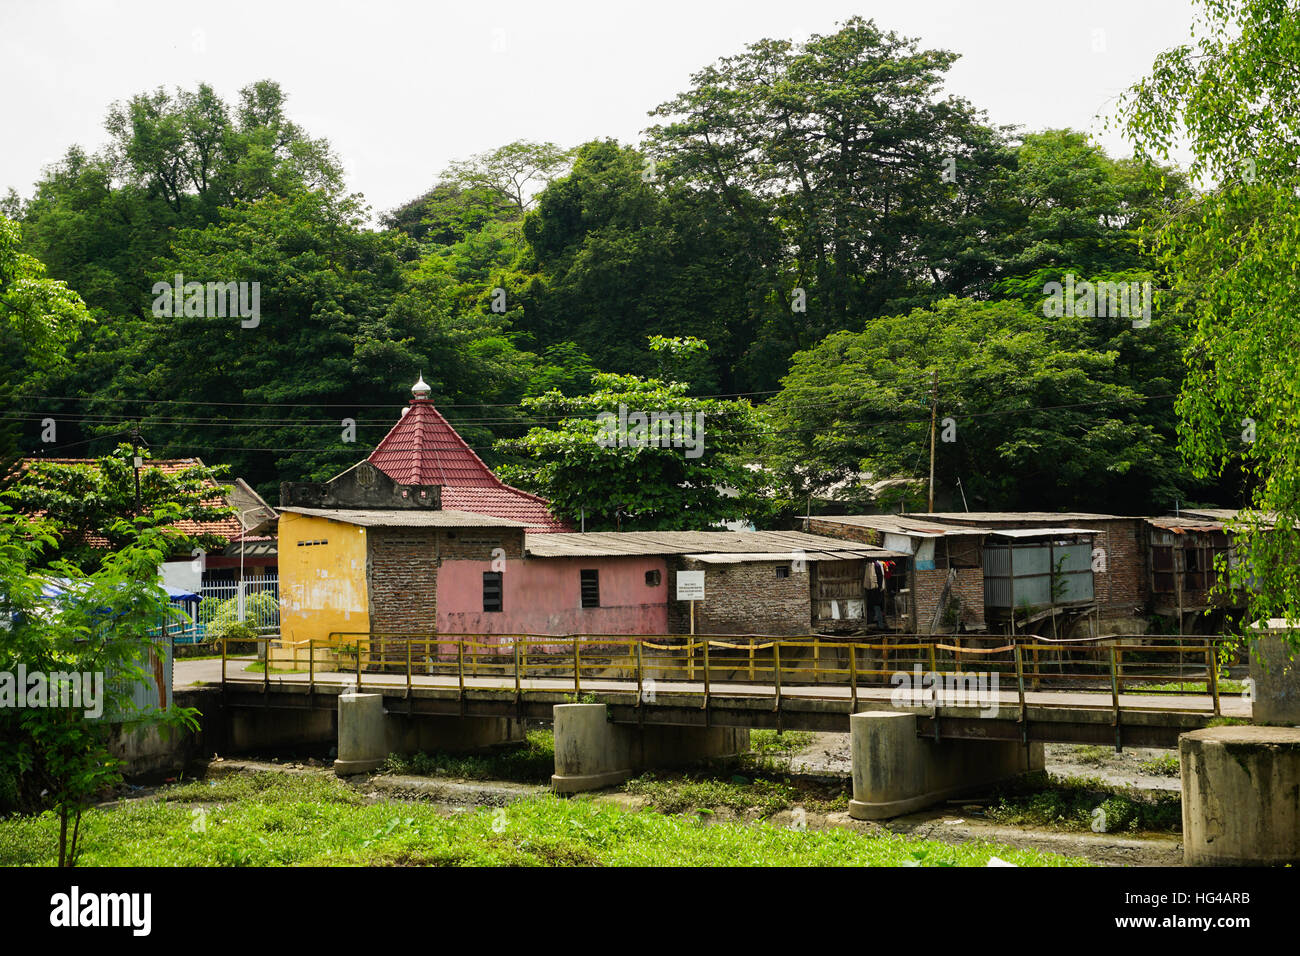 A mosque in the middle of slums photo taken in Semarang Indonesia Stock Photo